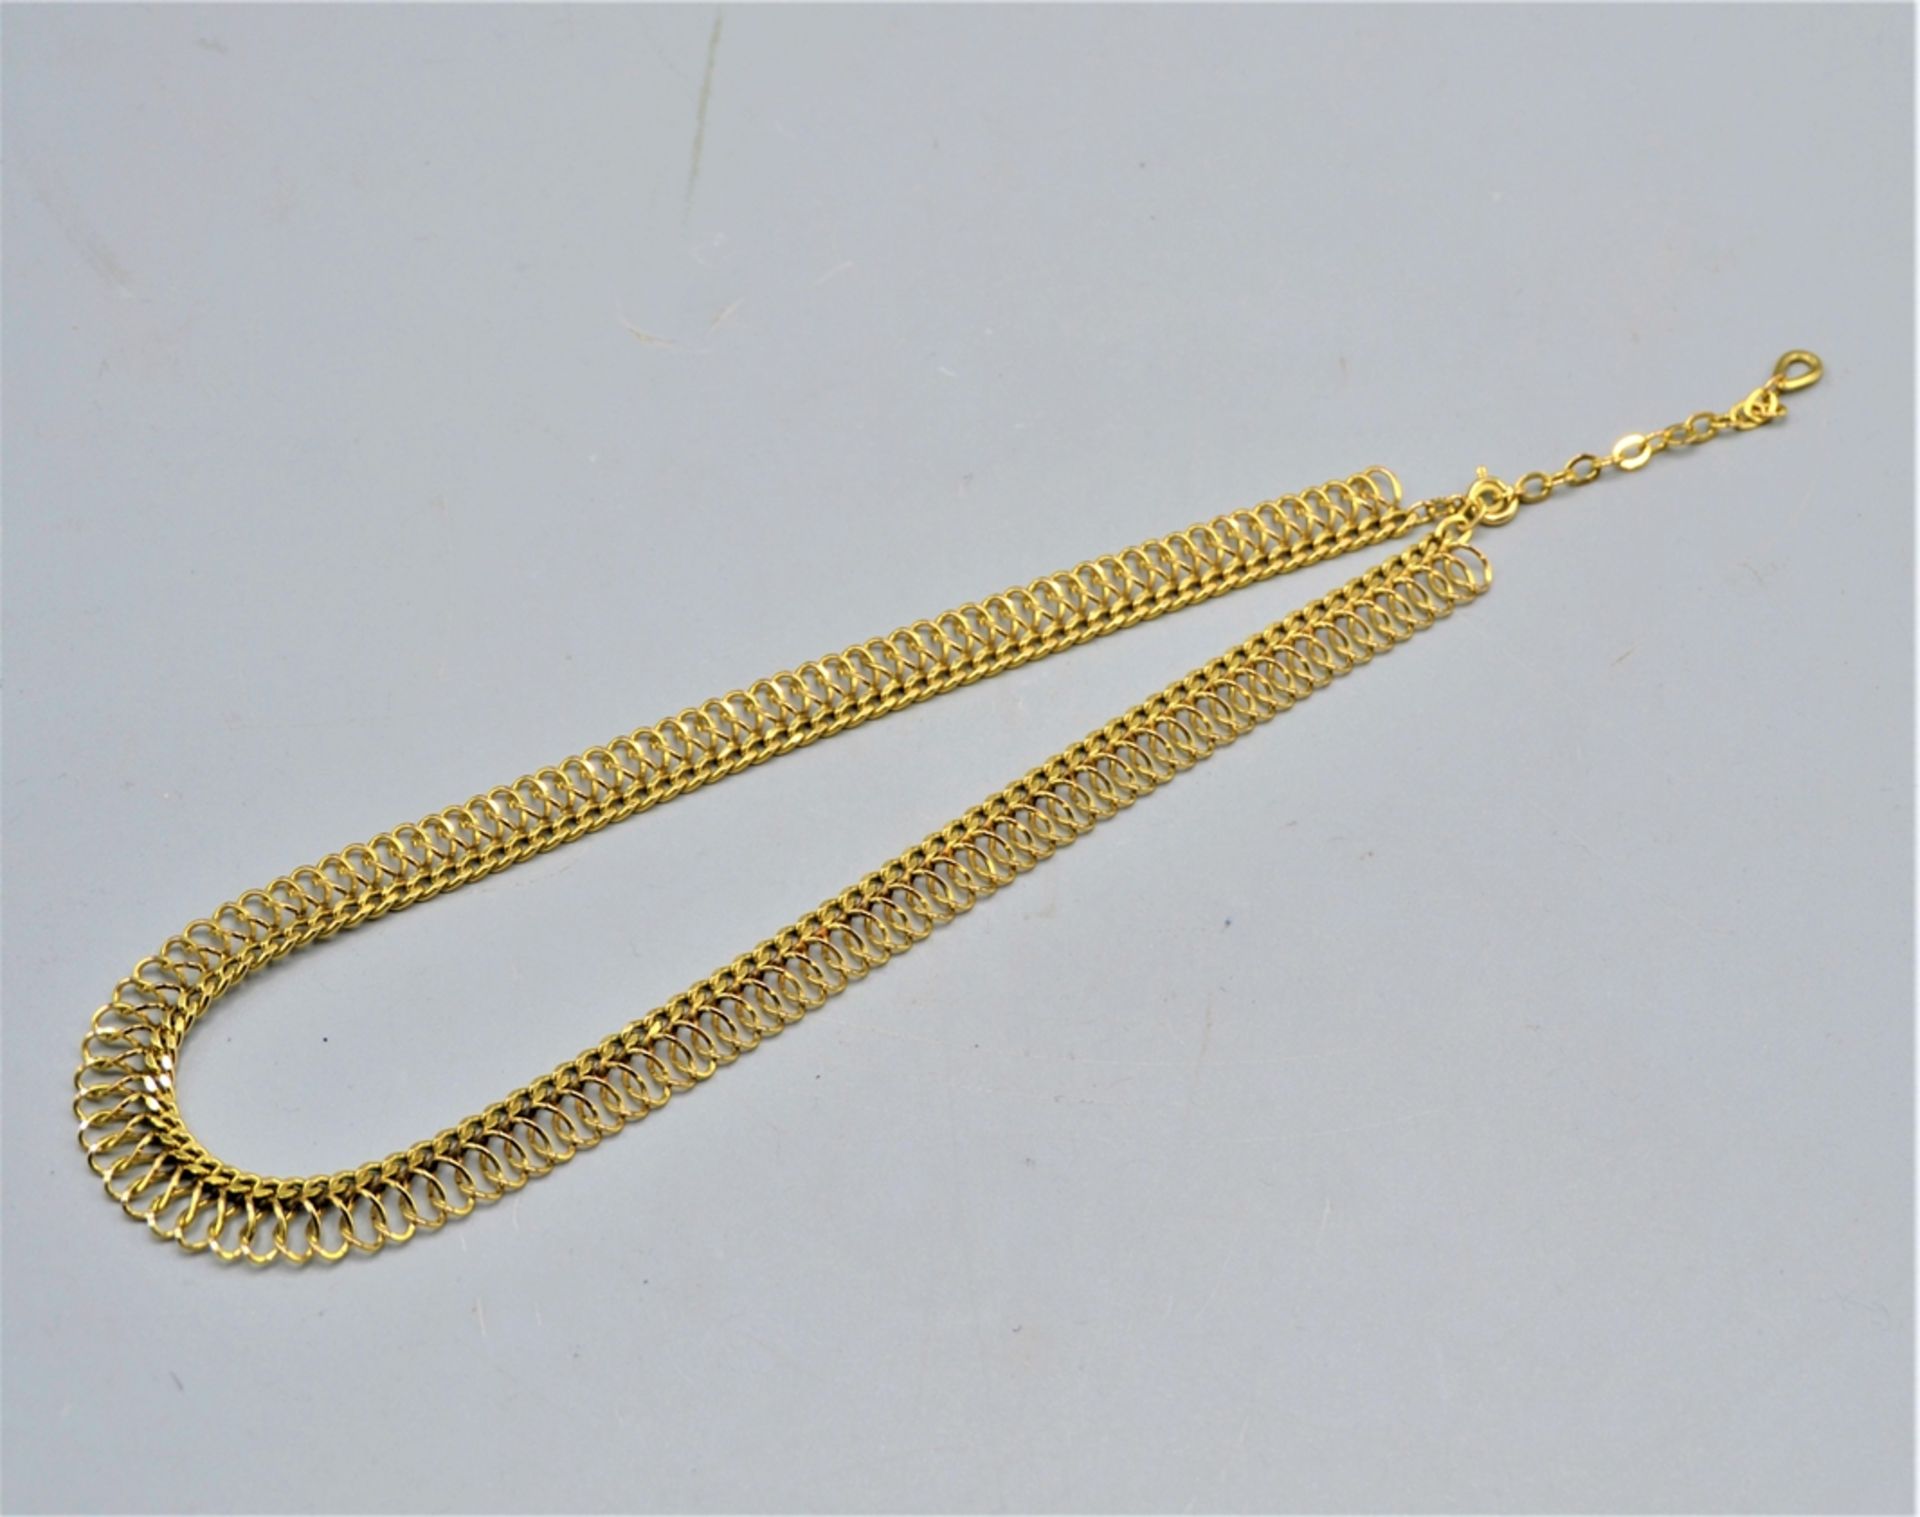 Collier 333 Gold ca. 41 - 47 cm 29 g - Image 3 of 3